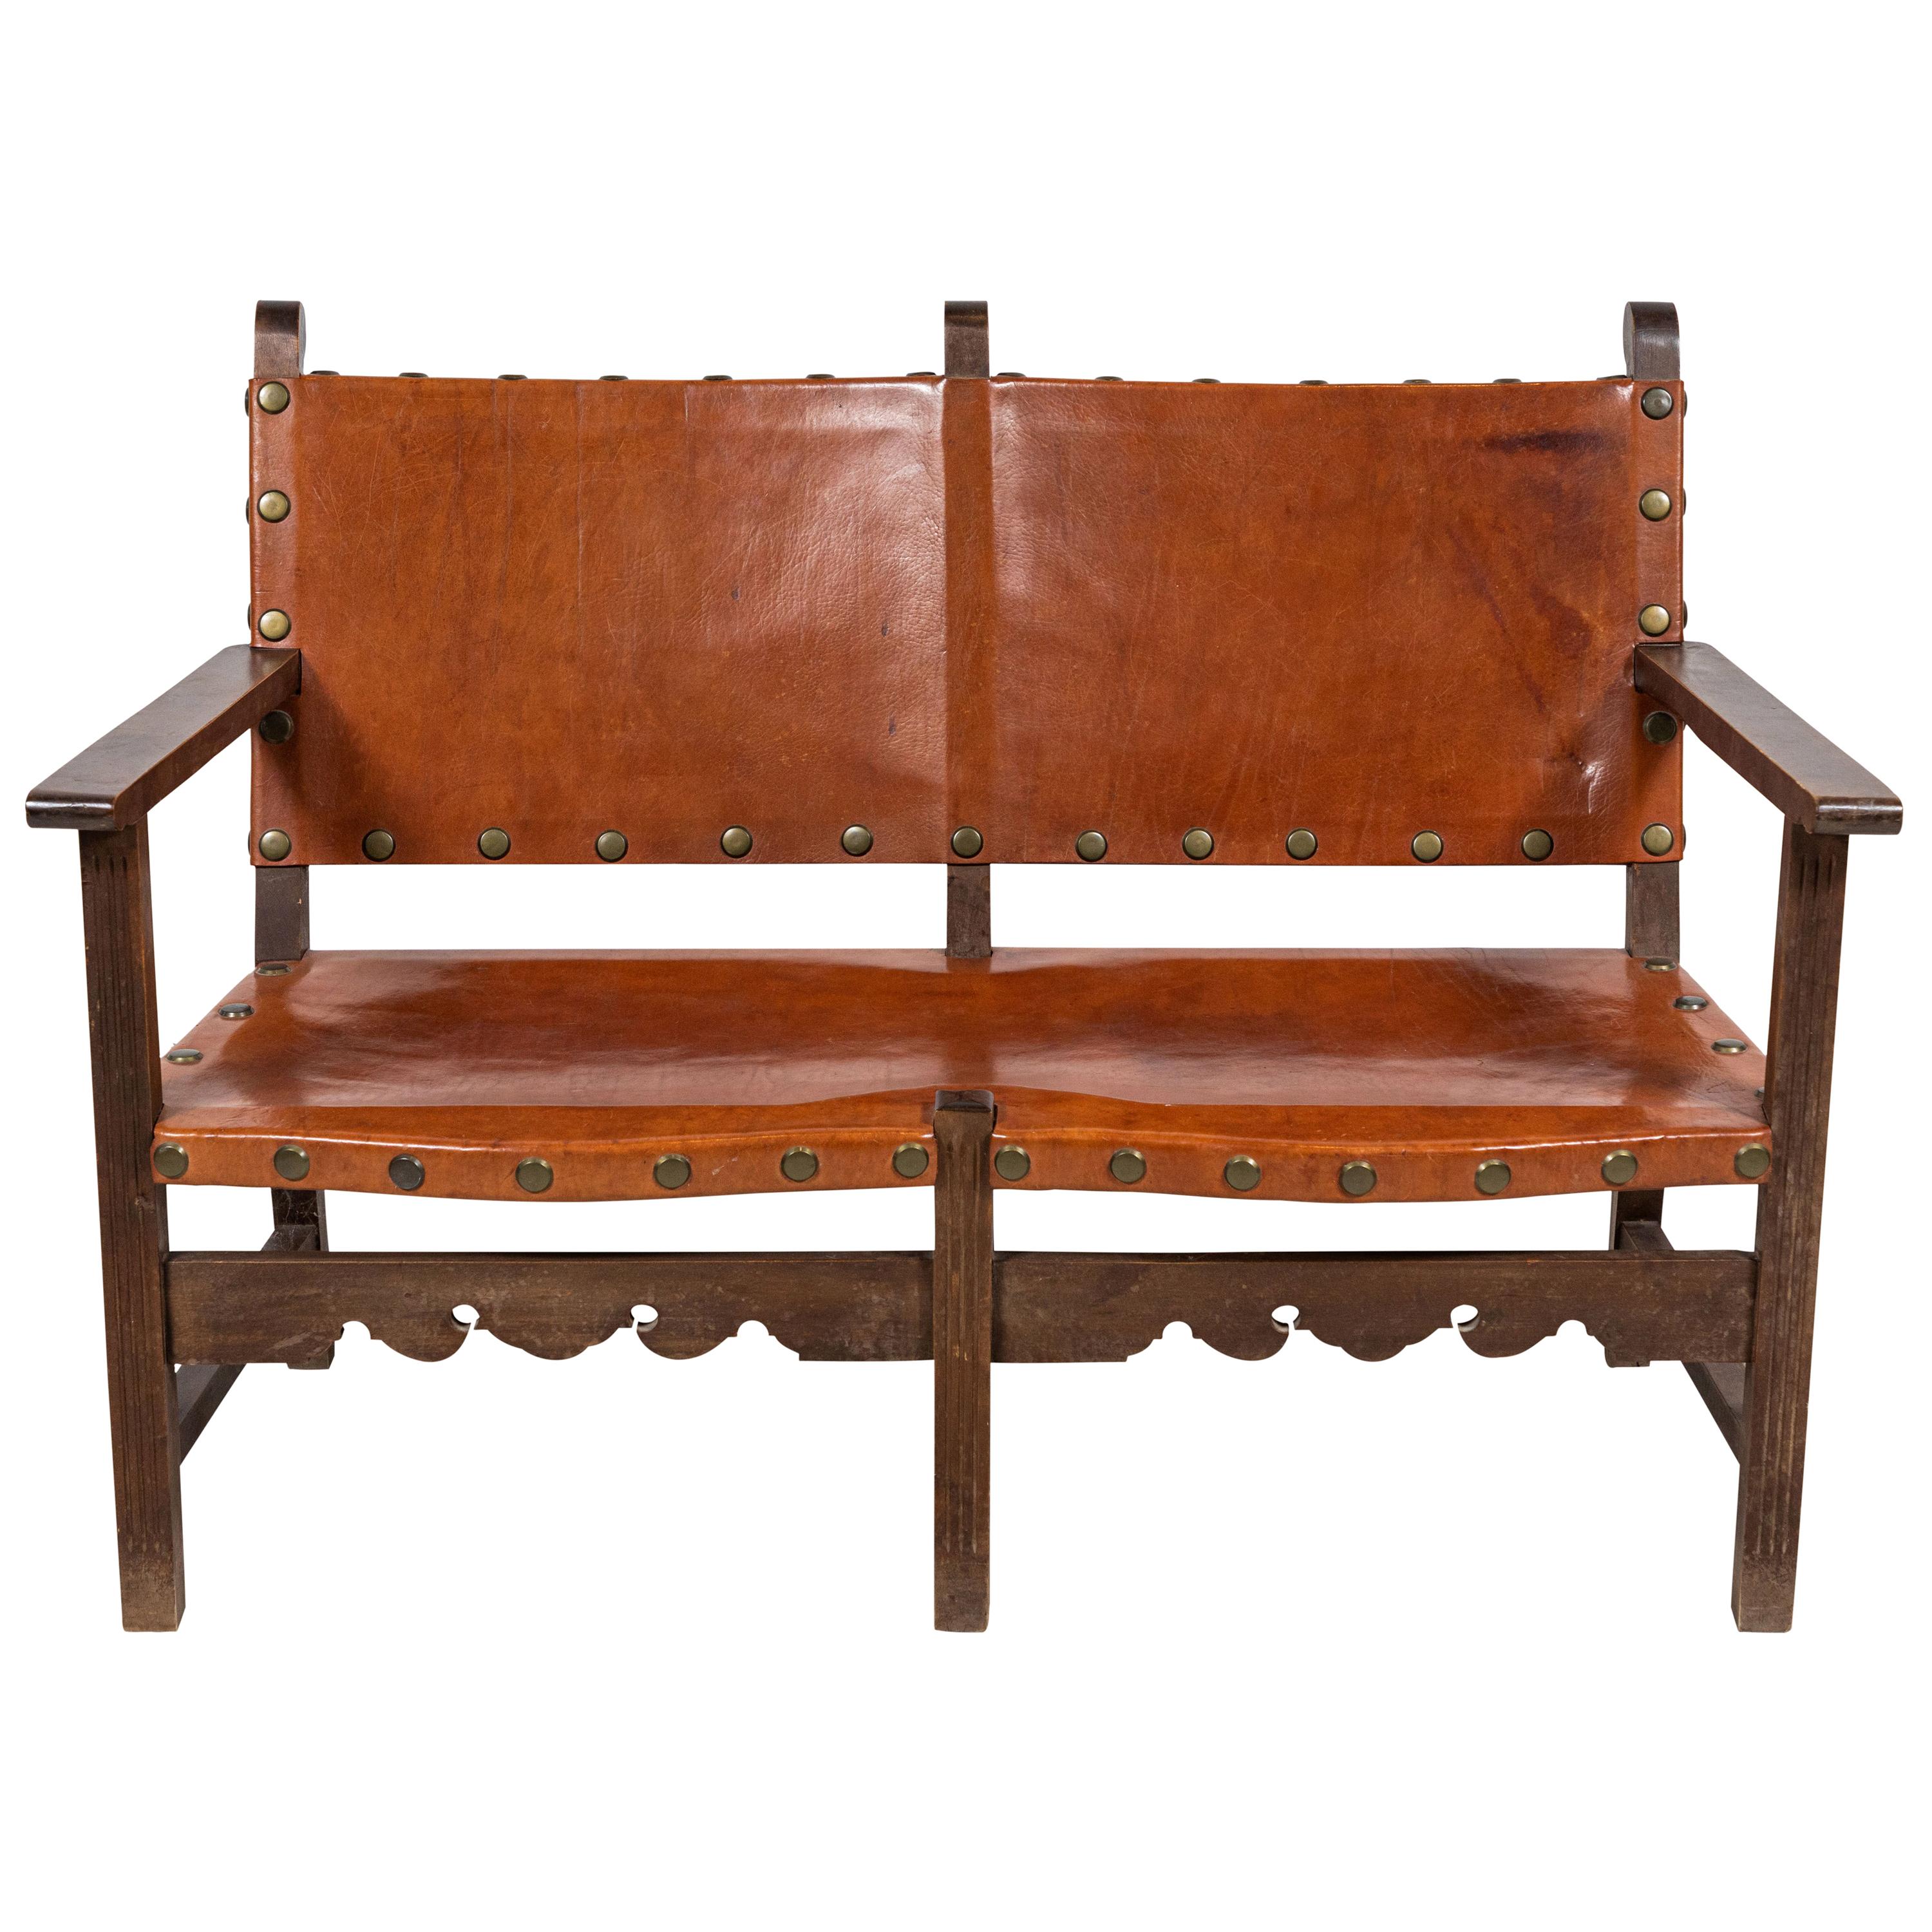 Spanish Leather Bench with with Wooden Frame